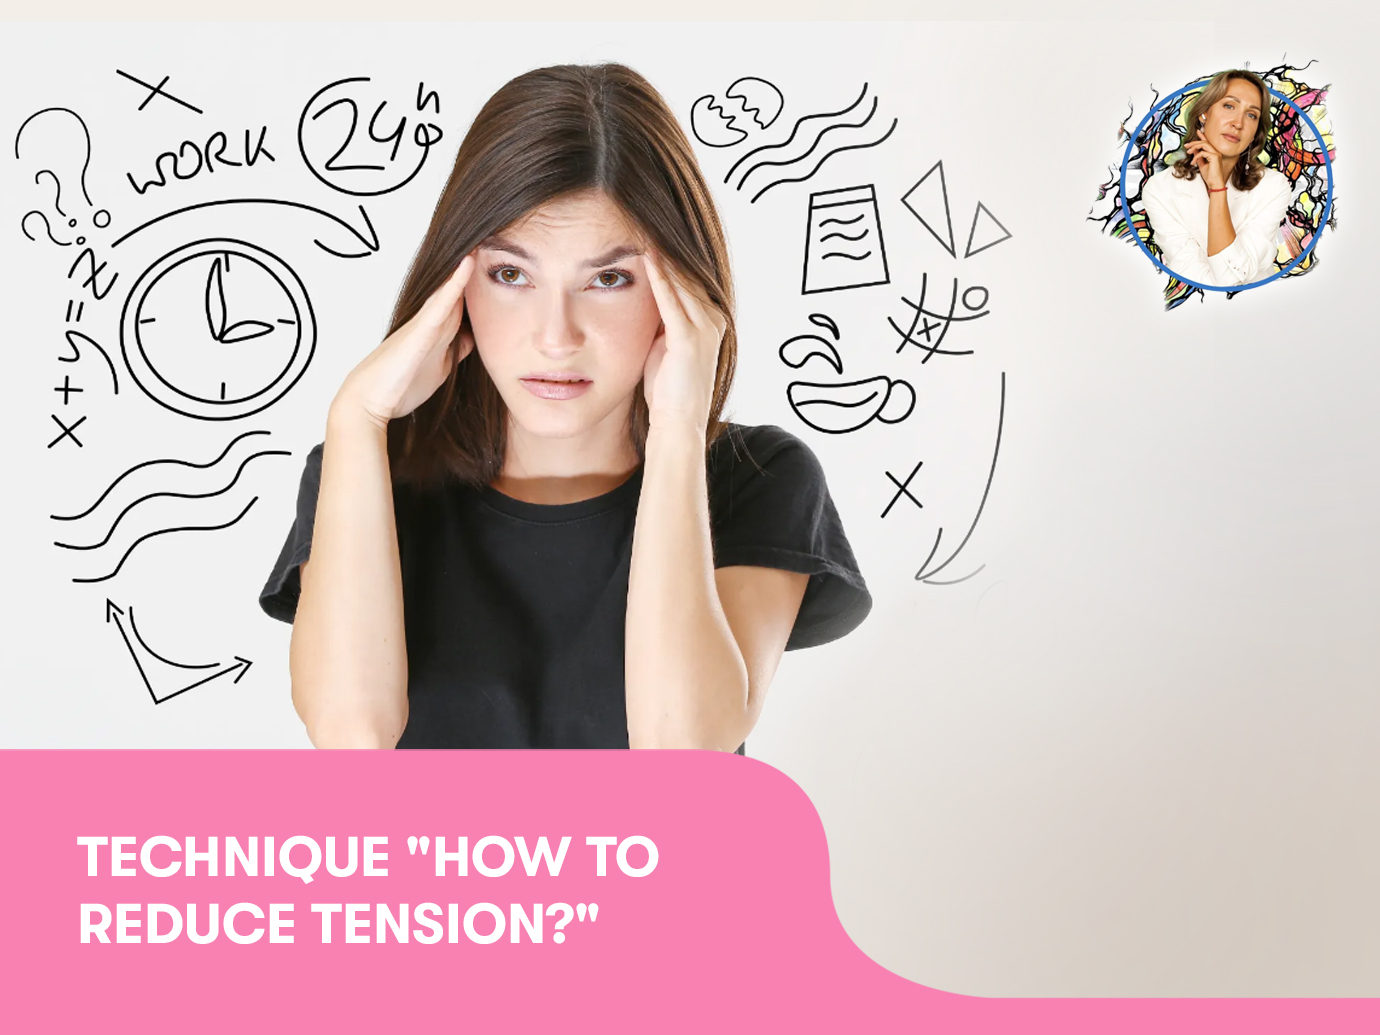 Technique “How to reduce tension?“